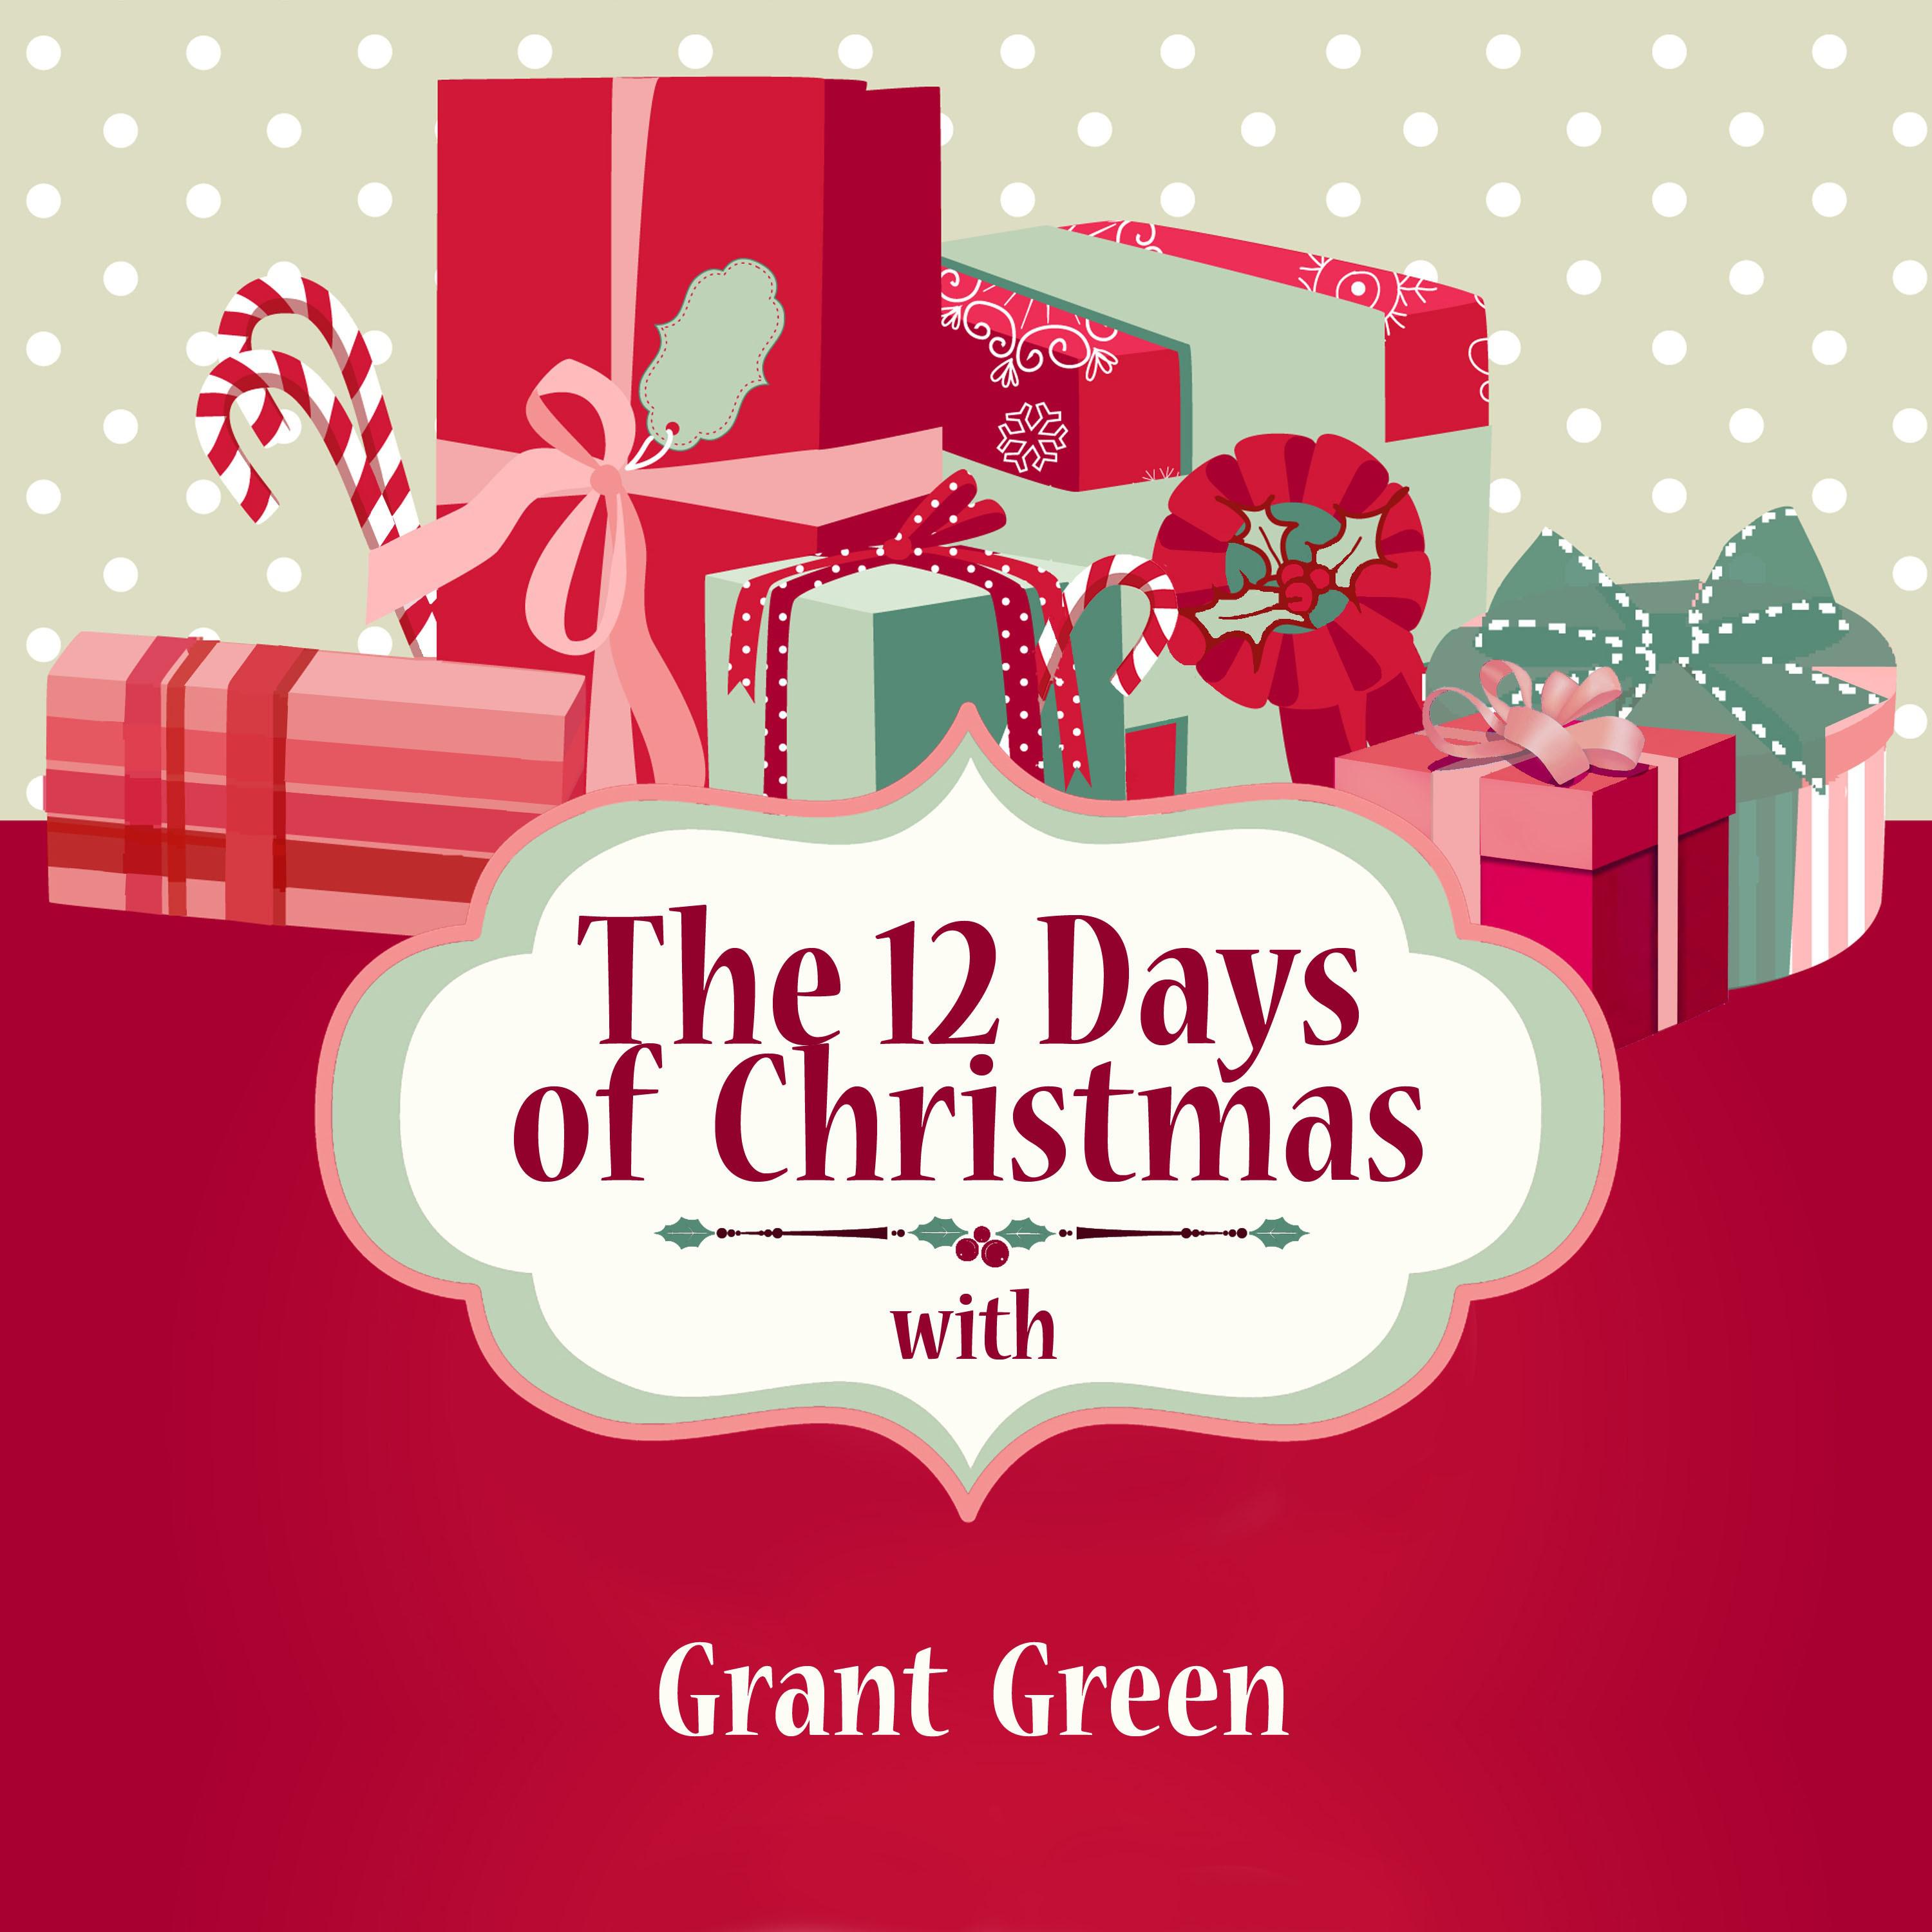 The 12 Days of Christmas with Grant Green